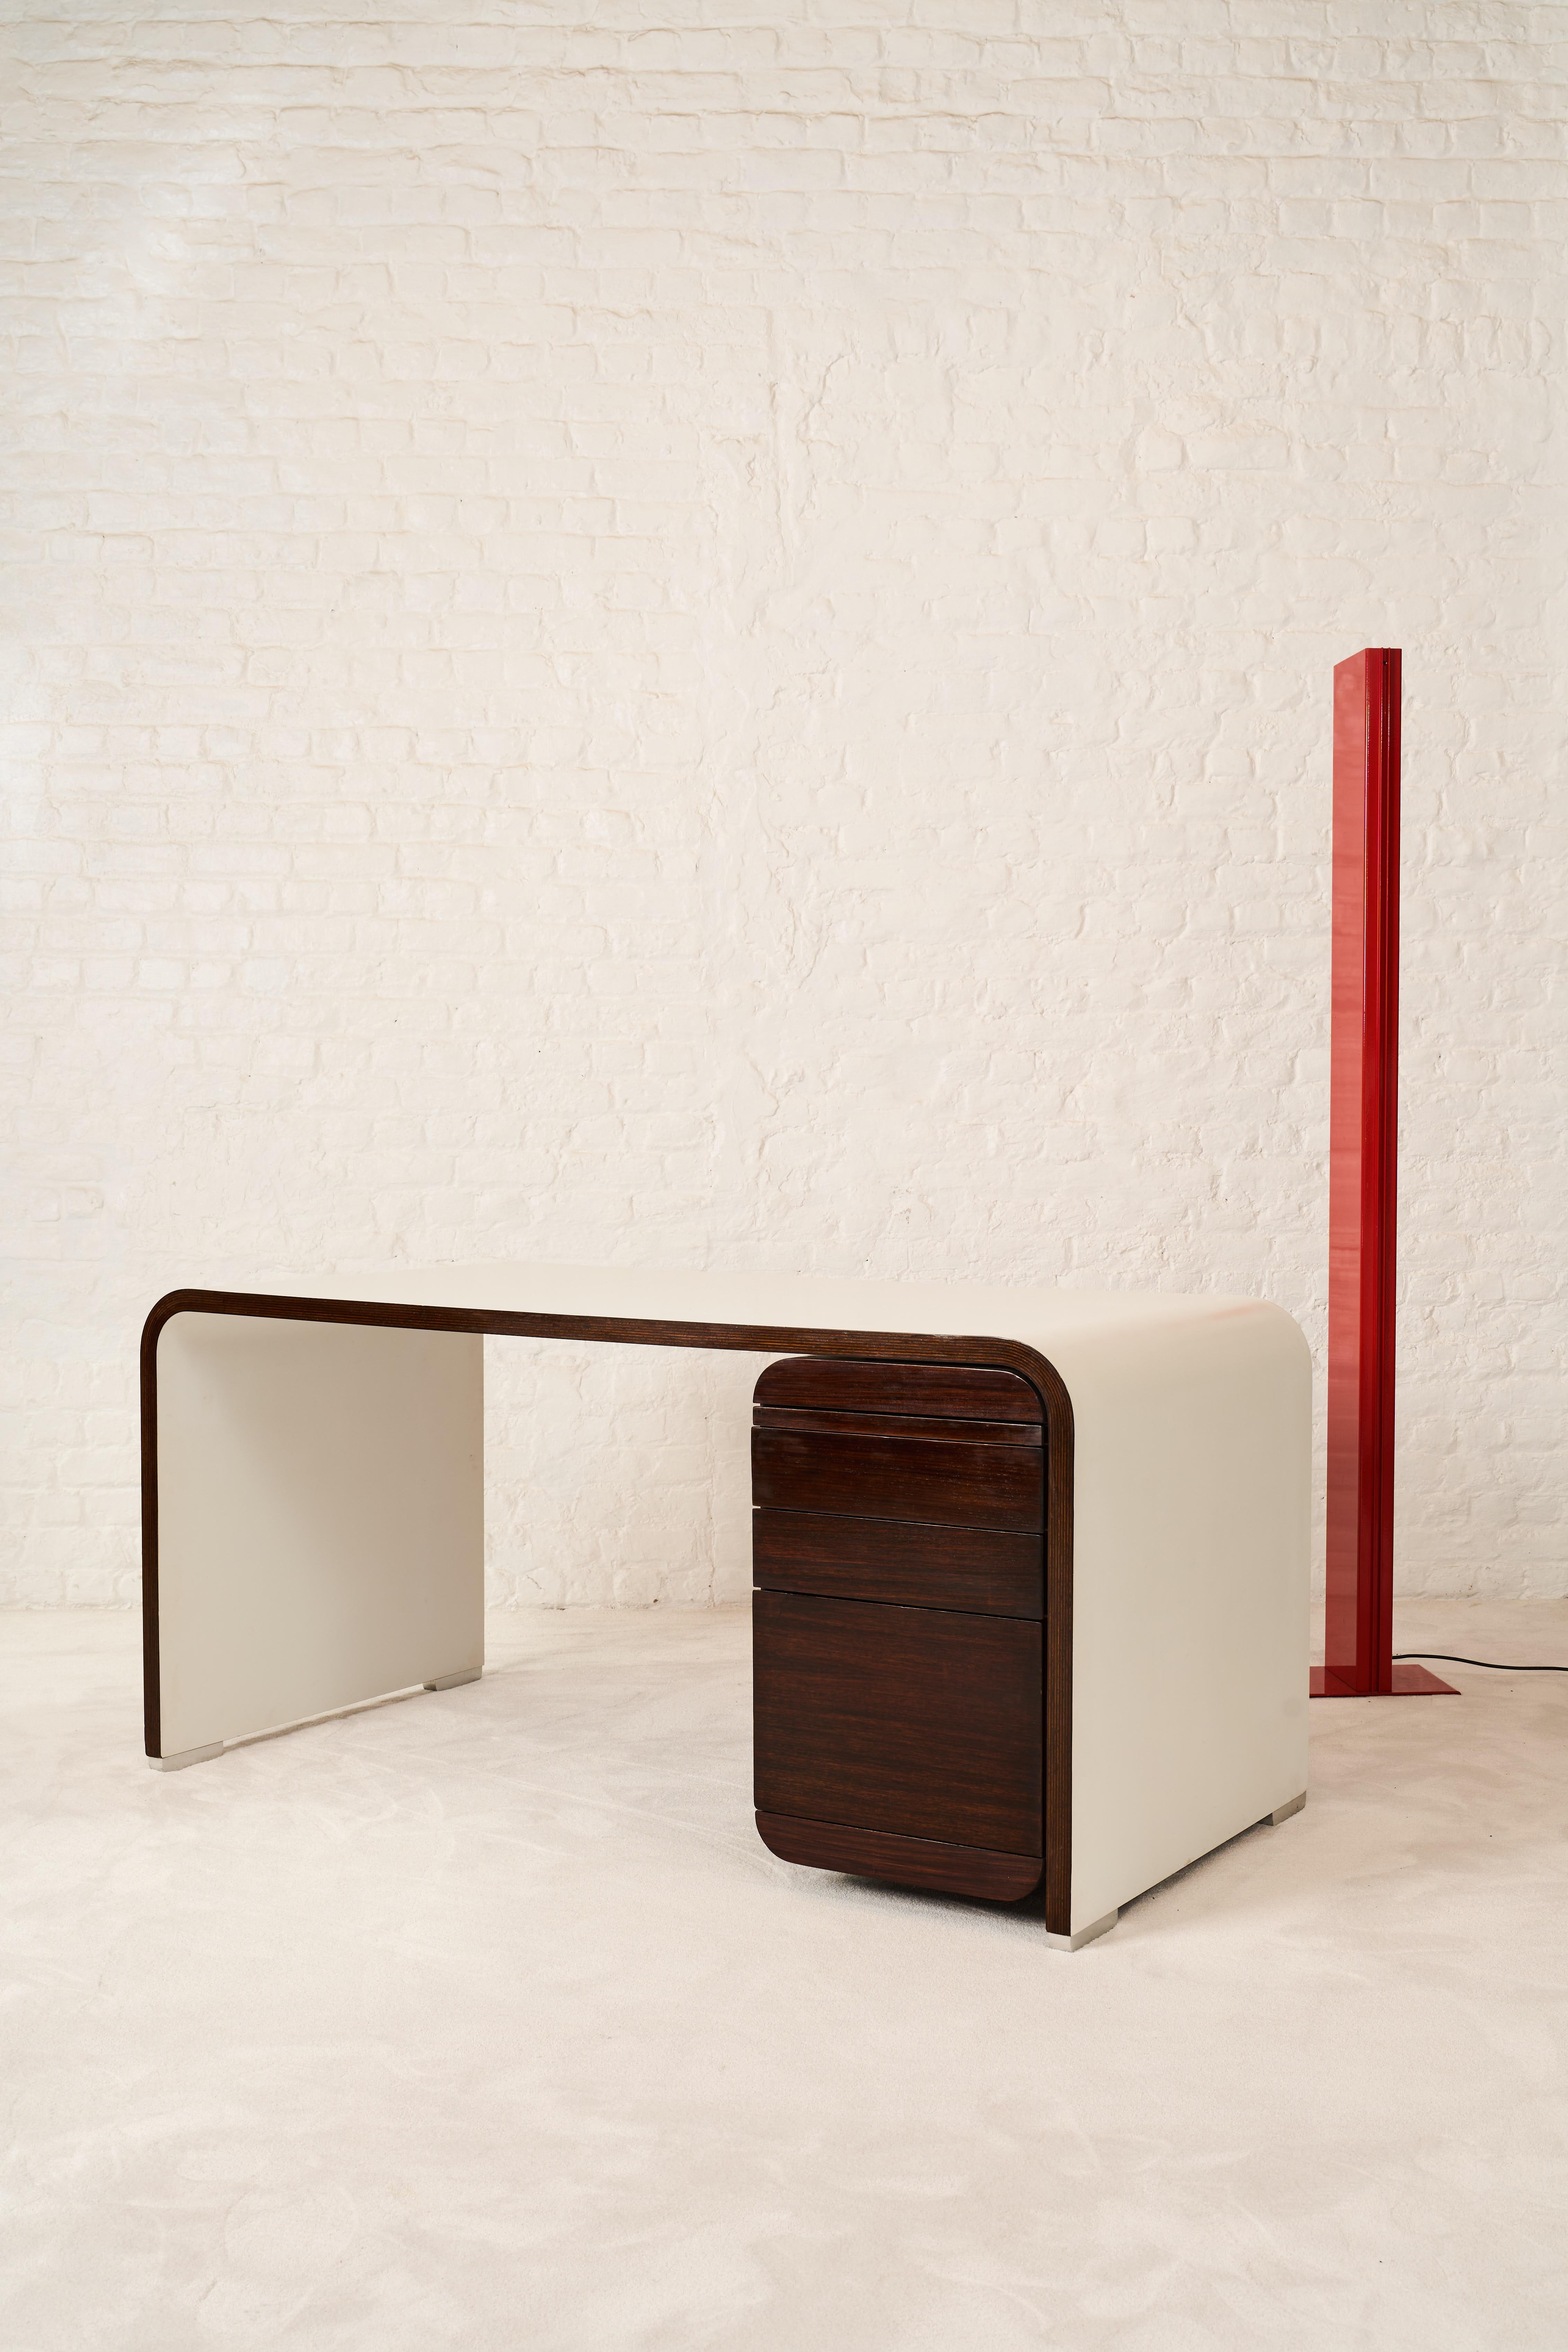 Desk produced by the Belgian company Bergwood in the 1970’s. Bergwood is known for its productions of Jules Wabbes. Based on sketches that are published in the book ‘Jules Wabbes – Interior Architect’ it is not clear how this design went through